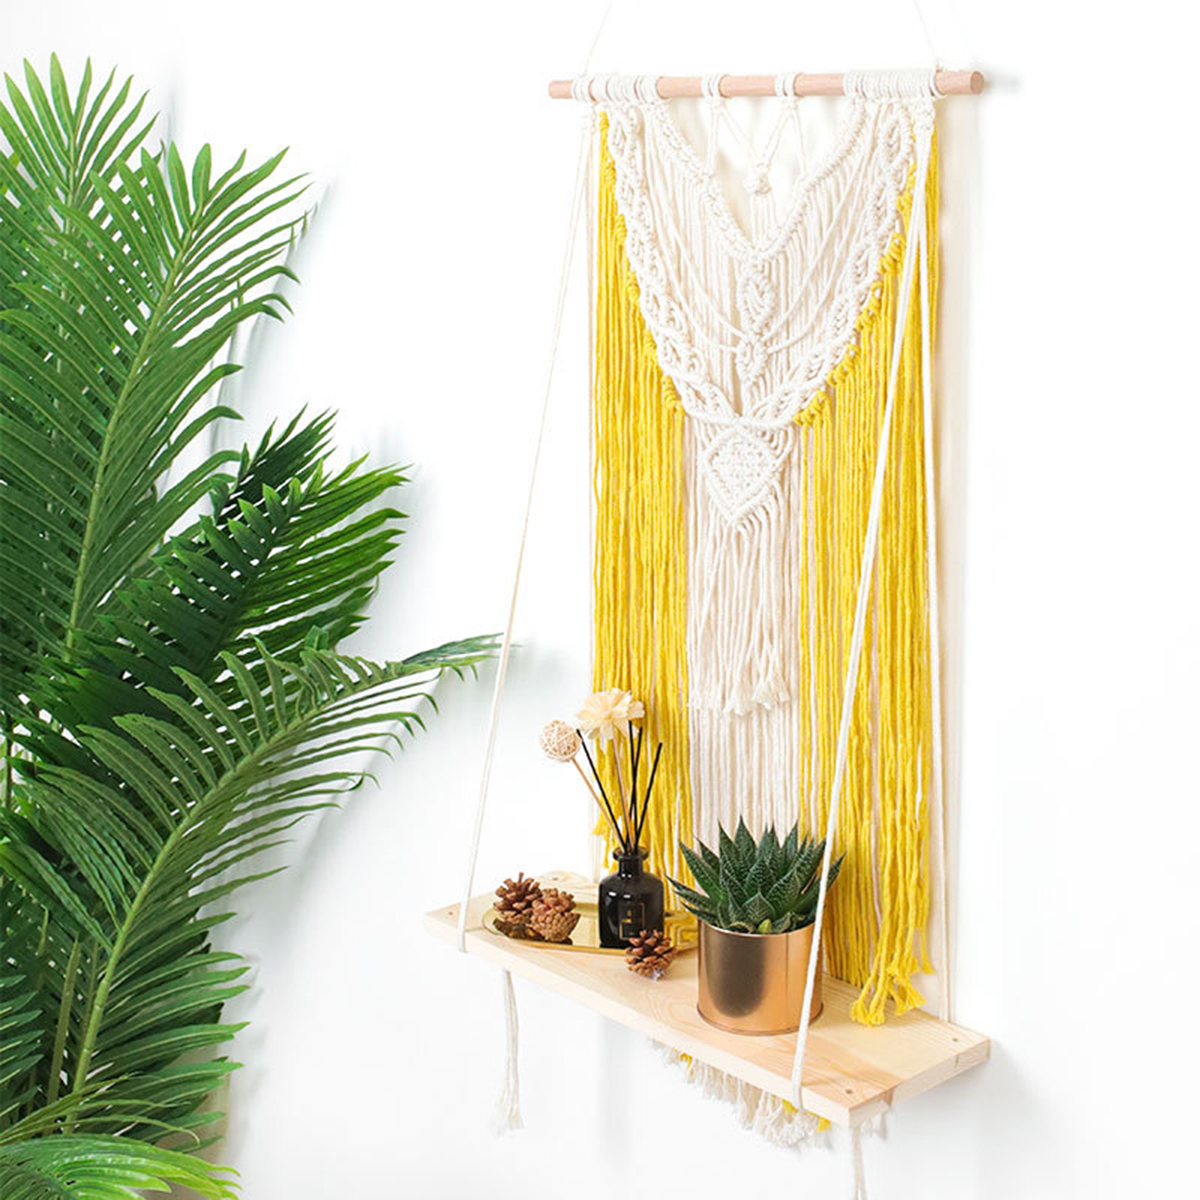 Wall-mounted-Lace-Woven-Macrame-Plant-Hanger-Wall-Cotton-Rope-Tapestry-Shelf-1727270-4